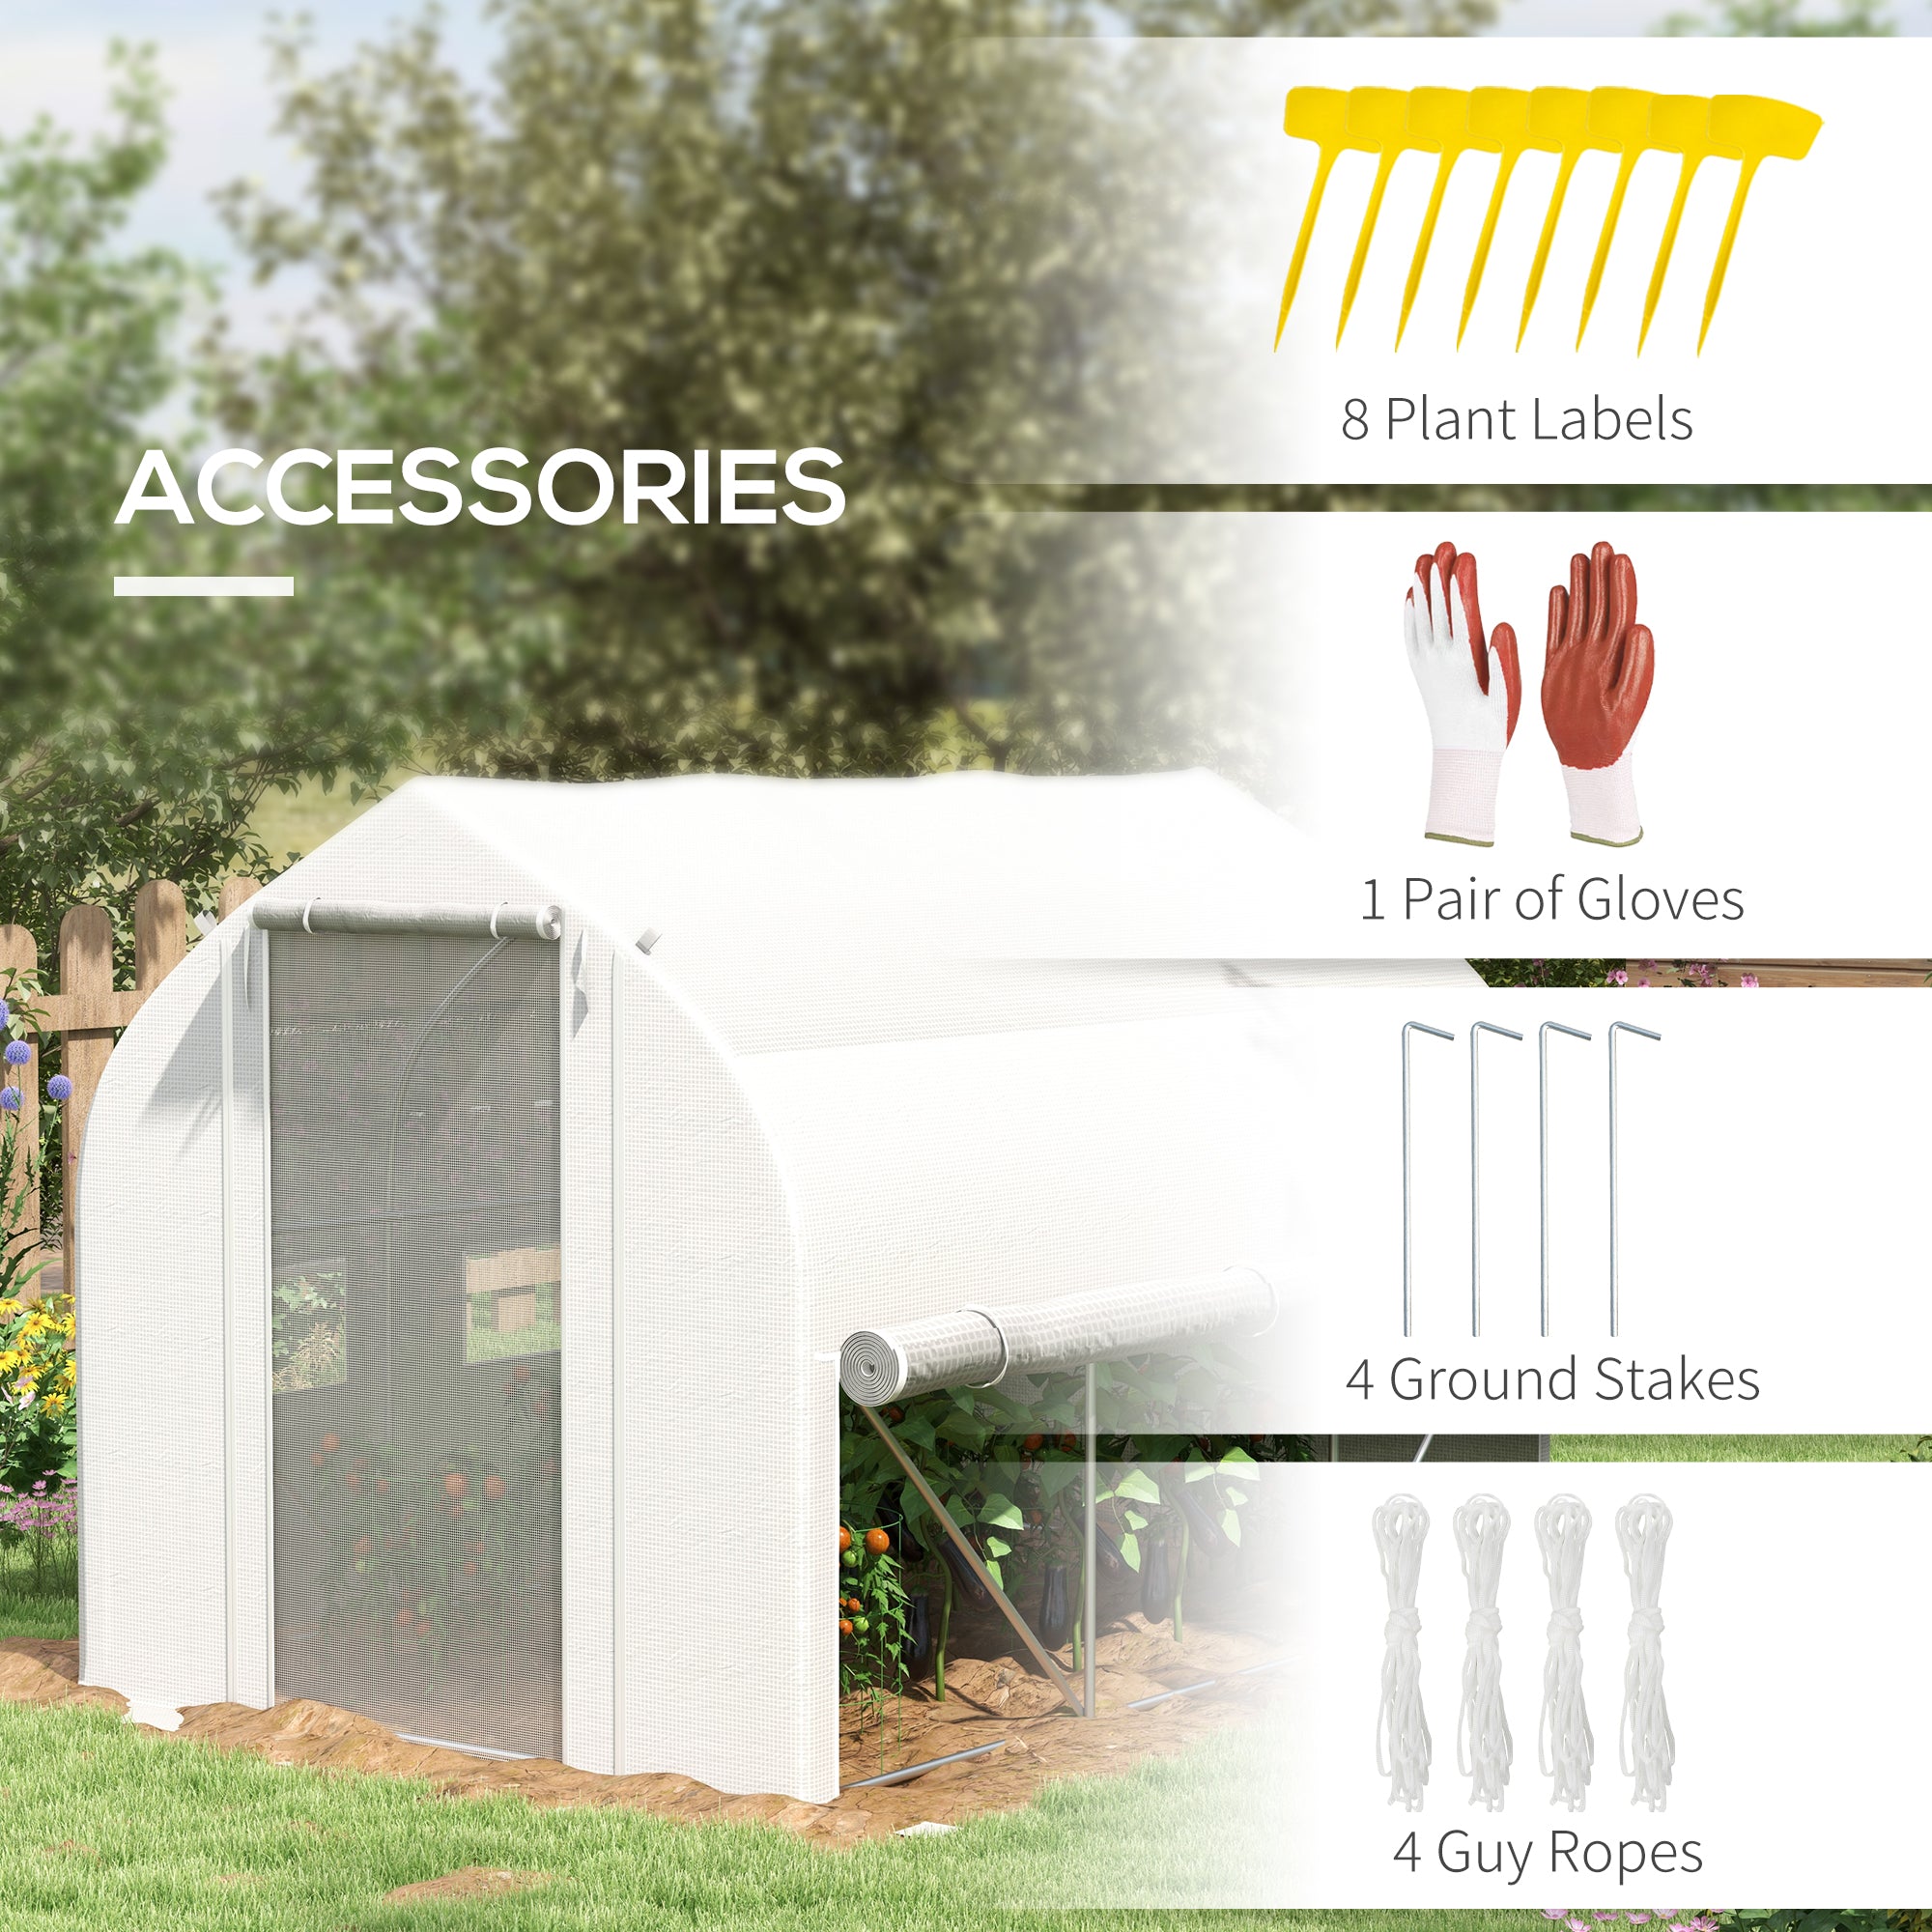 Outsunny 3 x 2m Walk-in Polytunnel Greenhouse, Zipped Roll Up Sidewalls, Mesh Door, 6 Mesh Windows, Tunnel Warm House Tent with PE Cover, Complimentary Plant Labels and Gloves, White